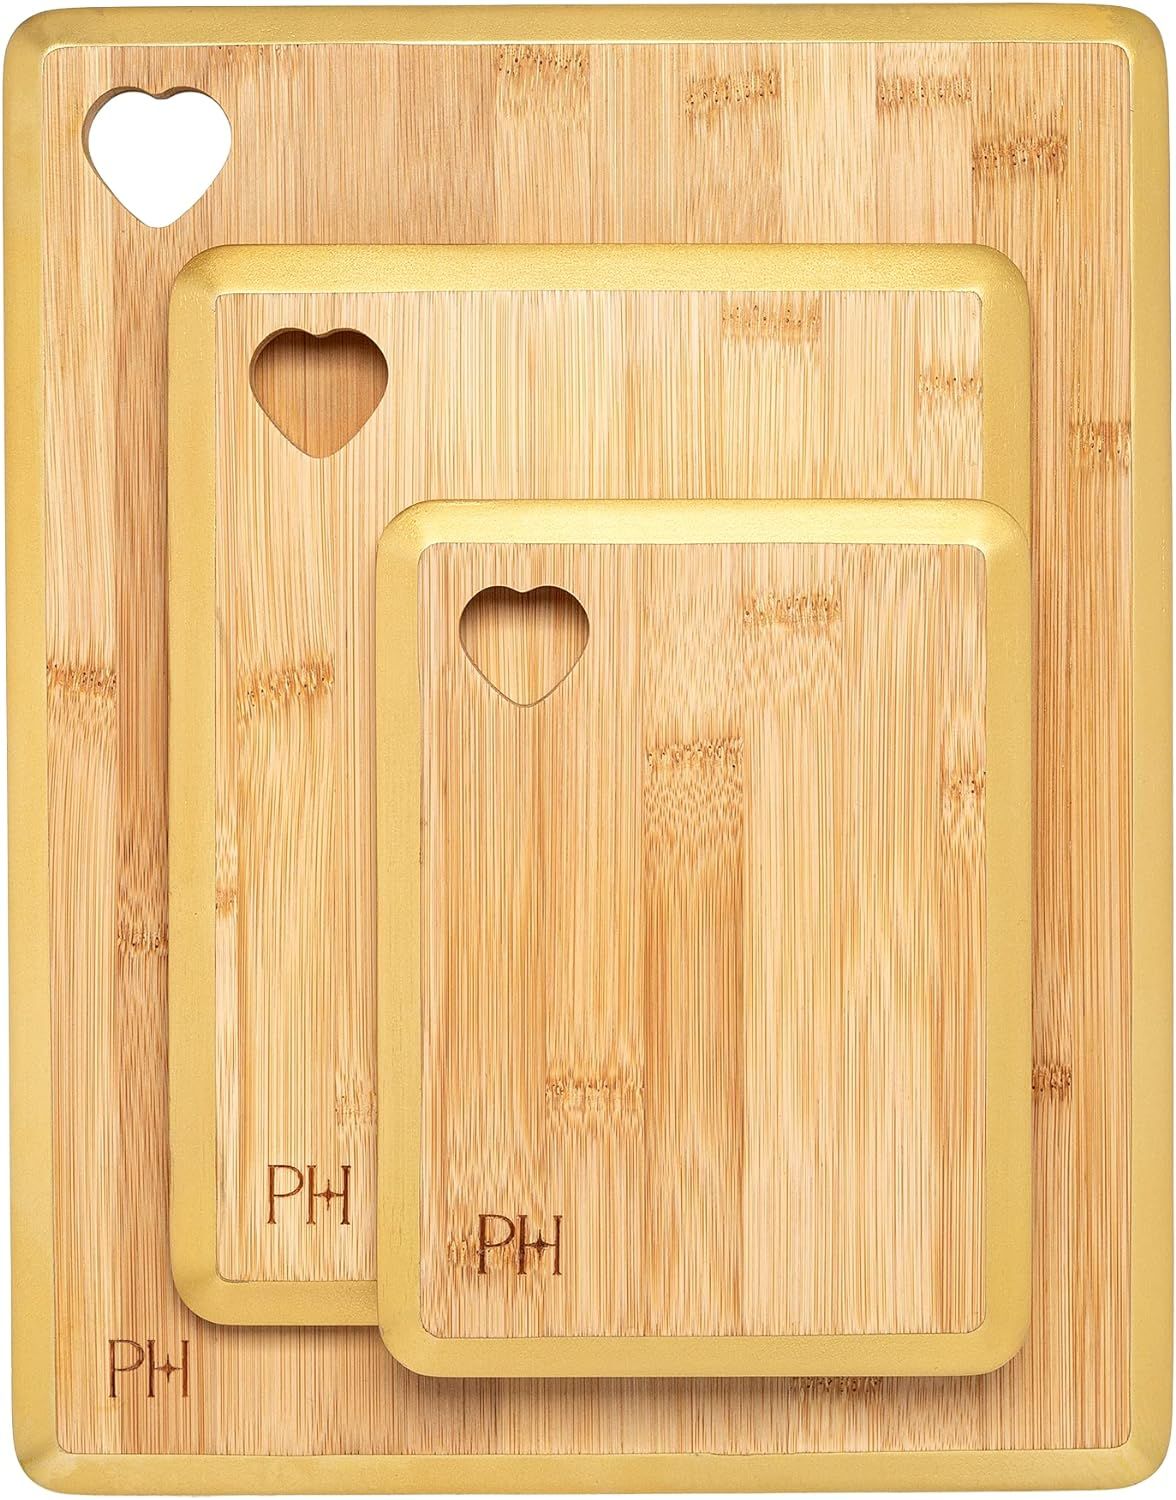 Paris Hilton Reversible Bamboo Cutting Board Set with Heart Shaped Cut-Out Design, Glamorous Gold... | Amazon (US)